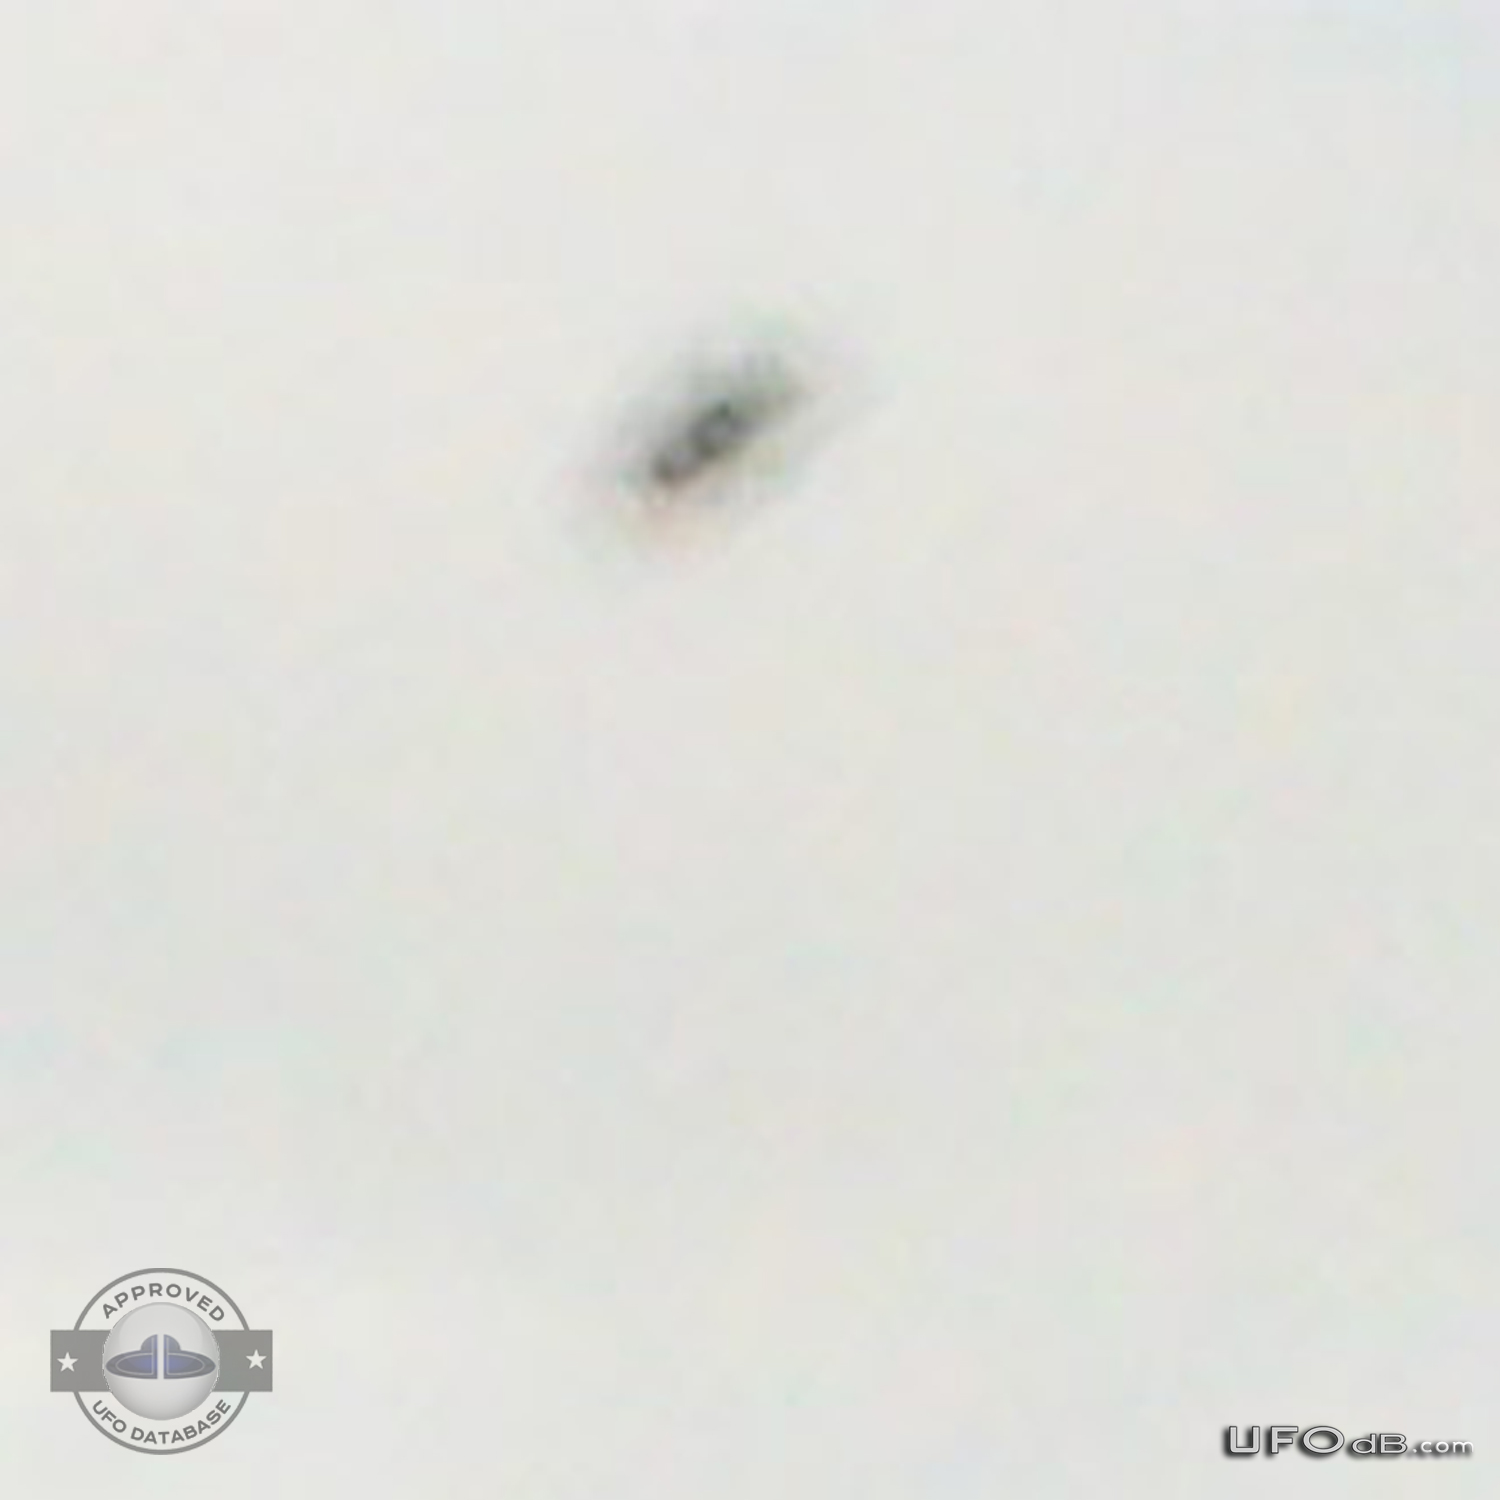 While looking at planes a Man see a UFO - Cauca, Colombia - March 2011 UFO Picture #280-4